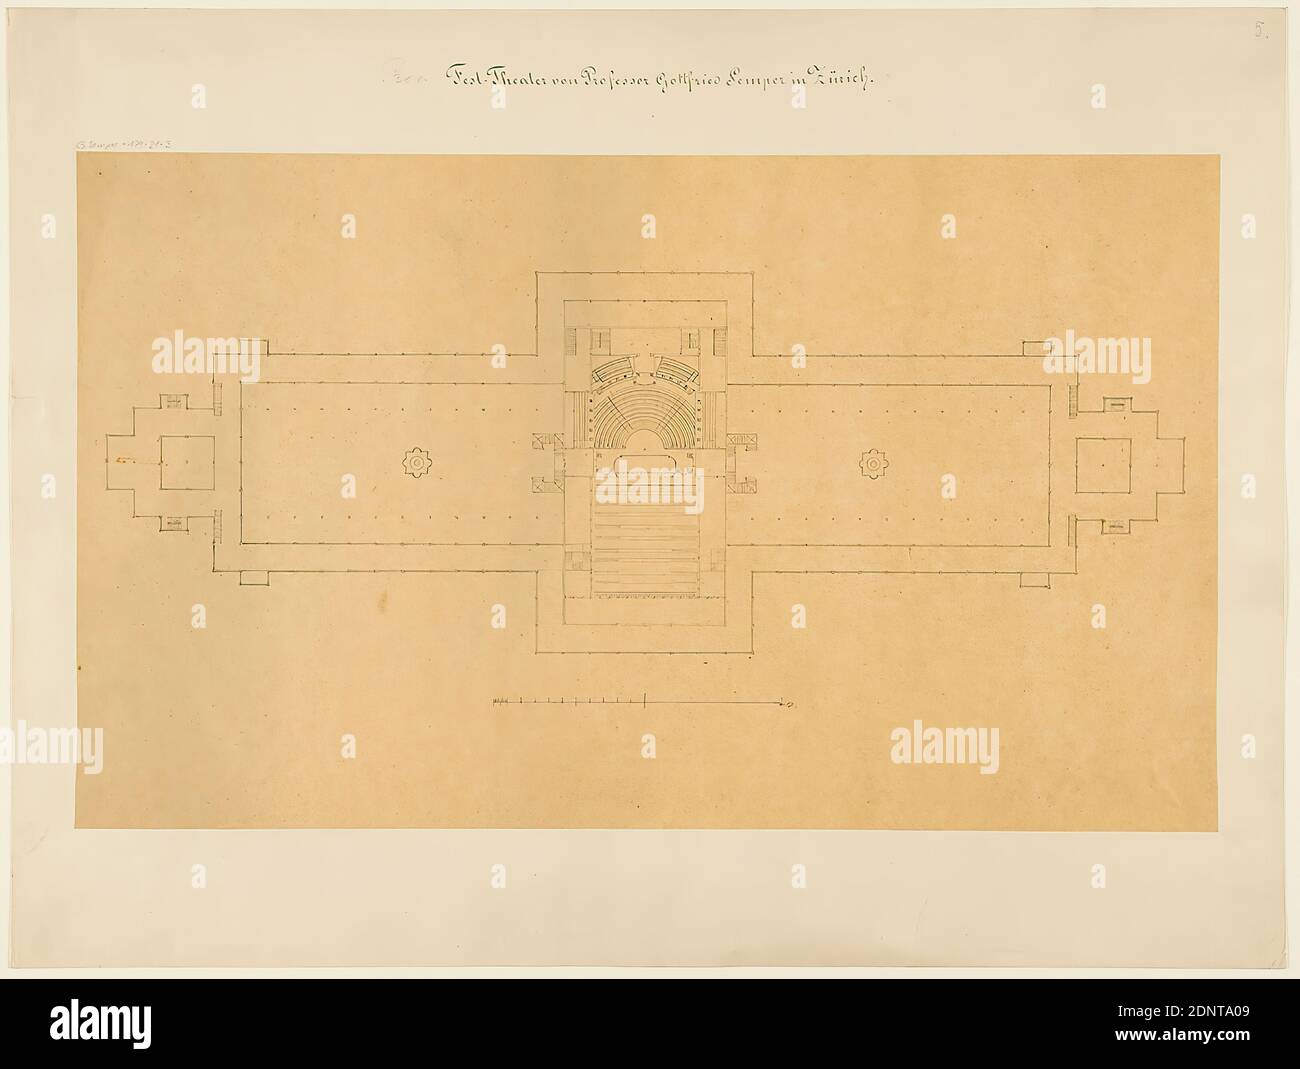 Gottfried Semper, design for the provisional Richard Wagner Festival Theater in the Glaspalast, Munich (Project A). Floor plan, tracing paper, drawing, sheet size: height: 34 cm; width: 57.5 cm, inscribed: recto on the cardboard: in ink: Prov. [in lead added] Festival Theater of Professor G. Semper in Zurich, in lead: G. Semper 179-21-3, draft drawings, design, plan of a building, opera house, architecture, architectural drawing or model Stock Photo